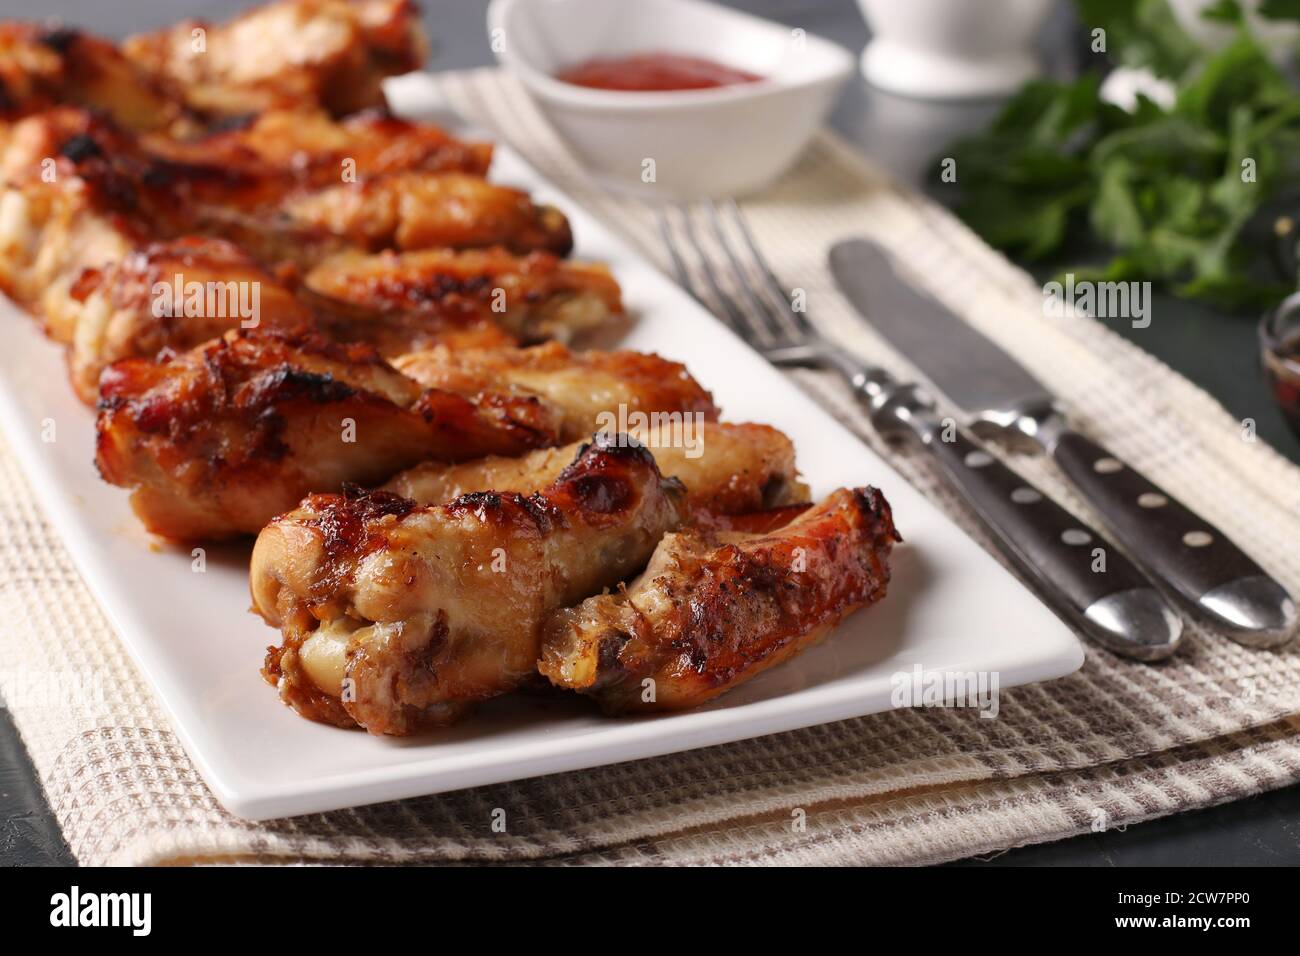 Fried chicken wings on a white plate served with tomato sauce, close-up, horizontal format Stock Photo